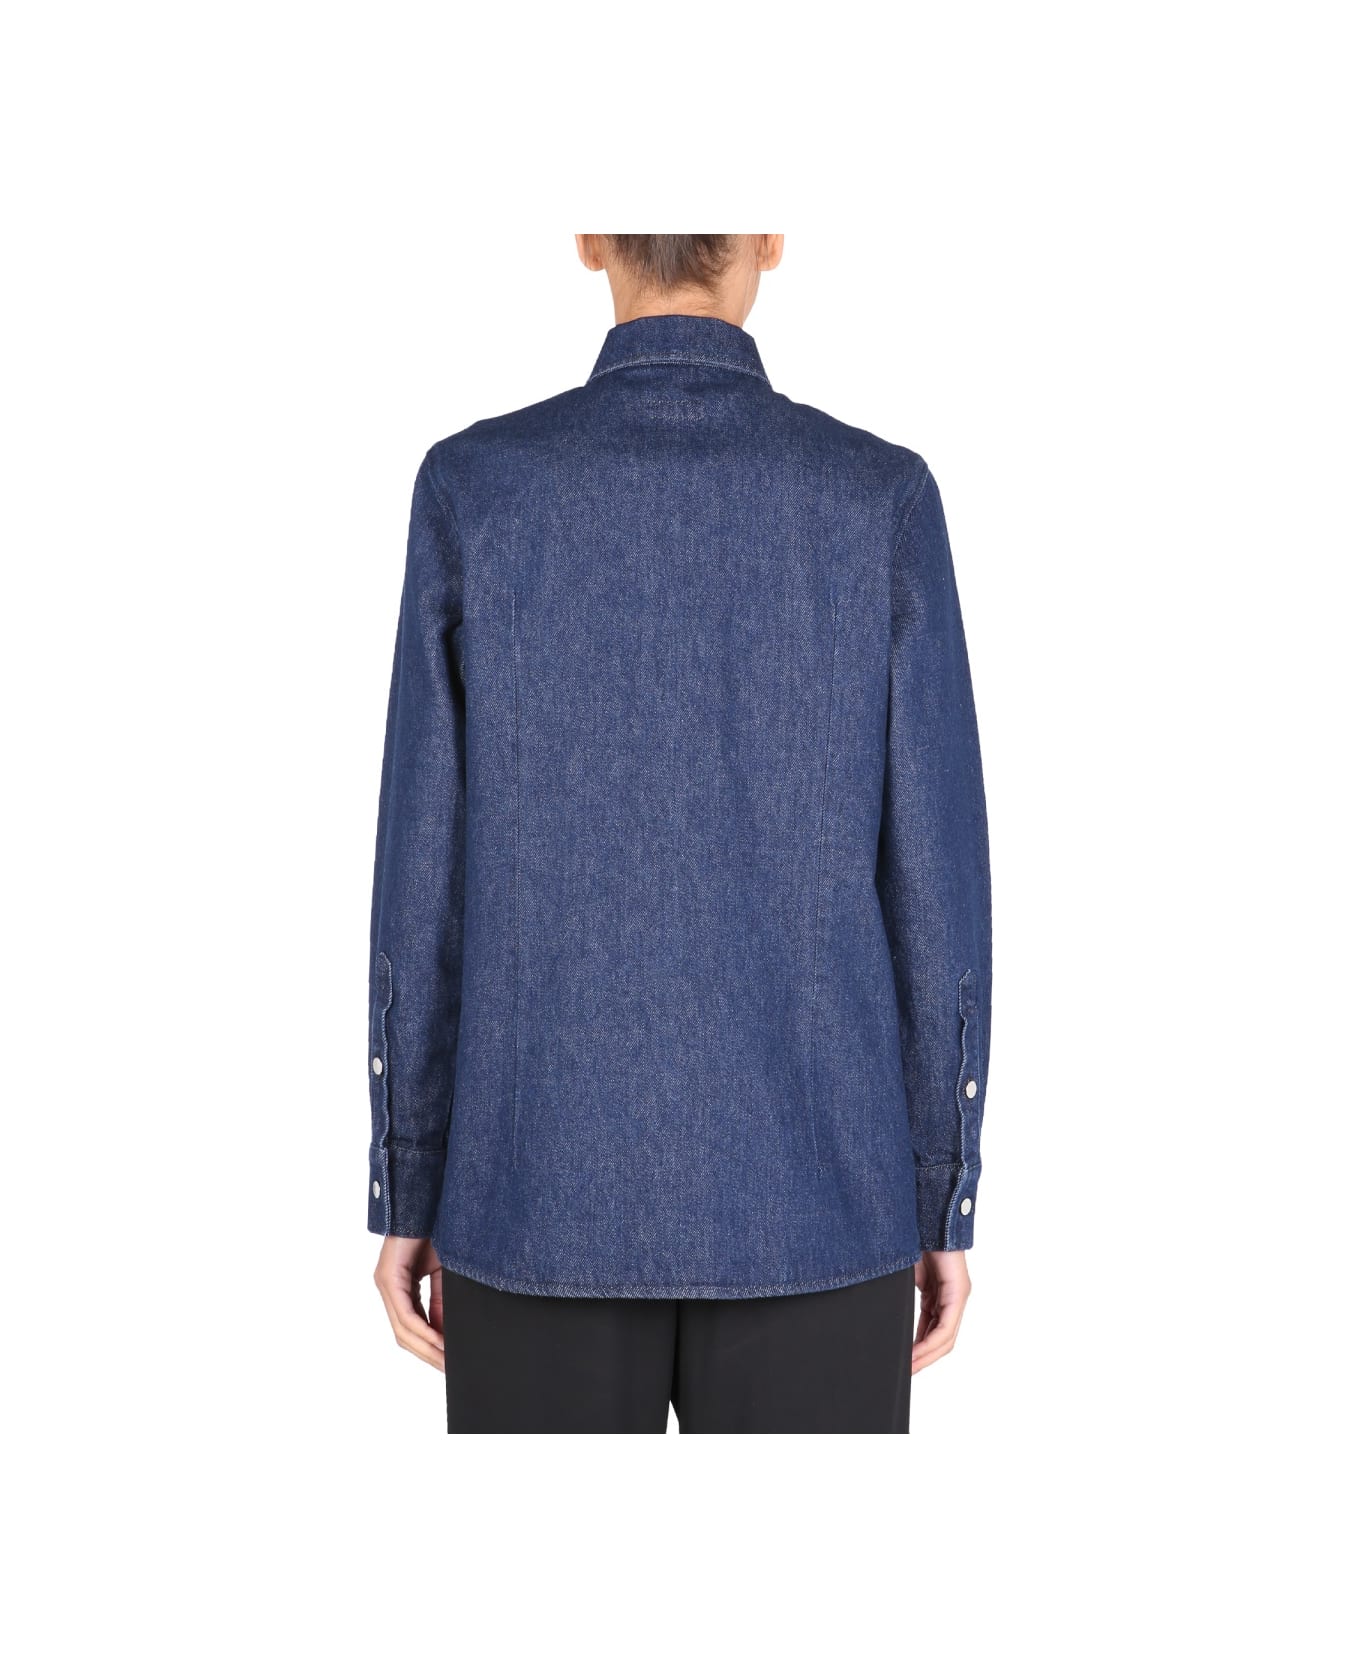 Raf Simons Shirt Jacket With Logo Patch - BLUE シャツ